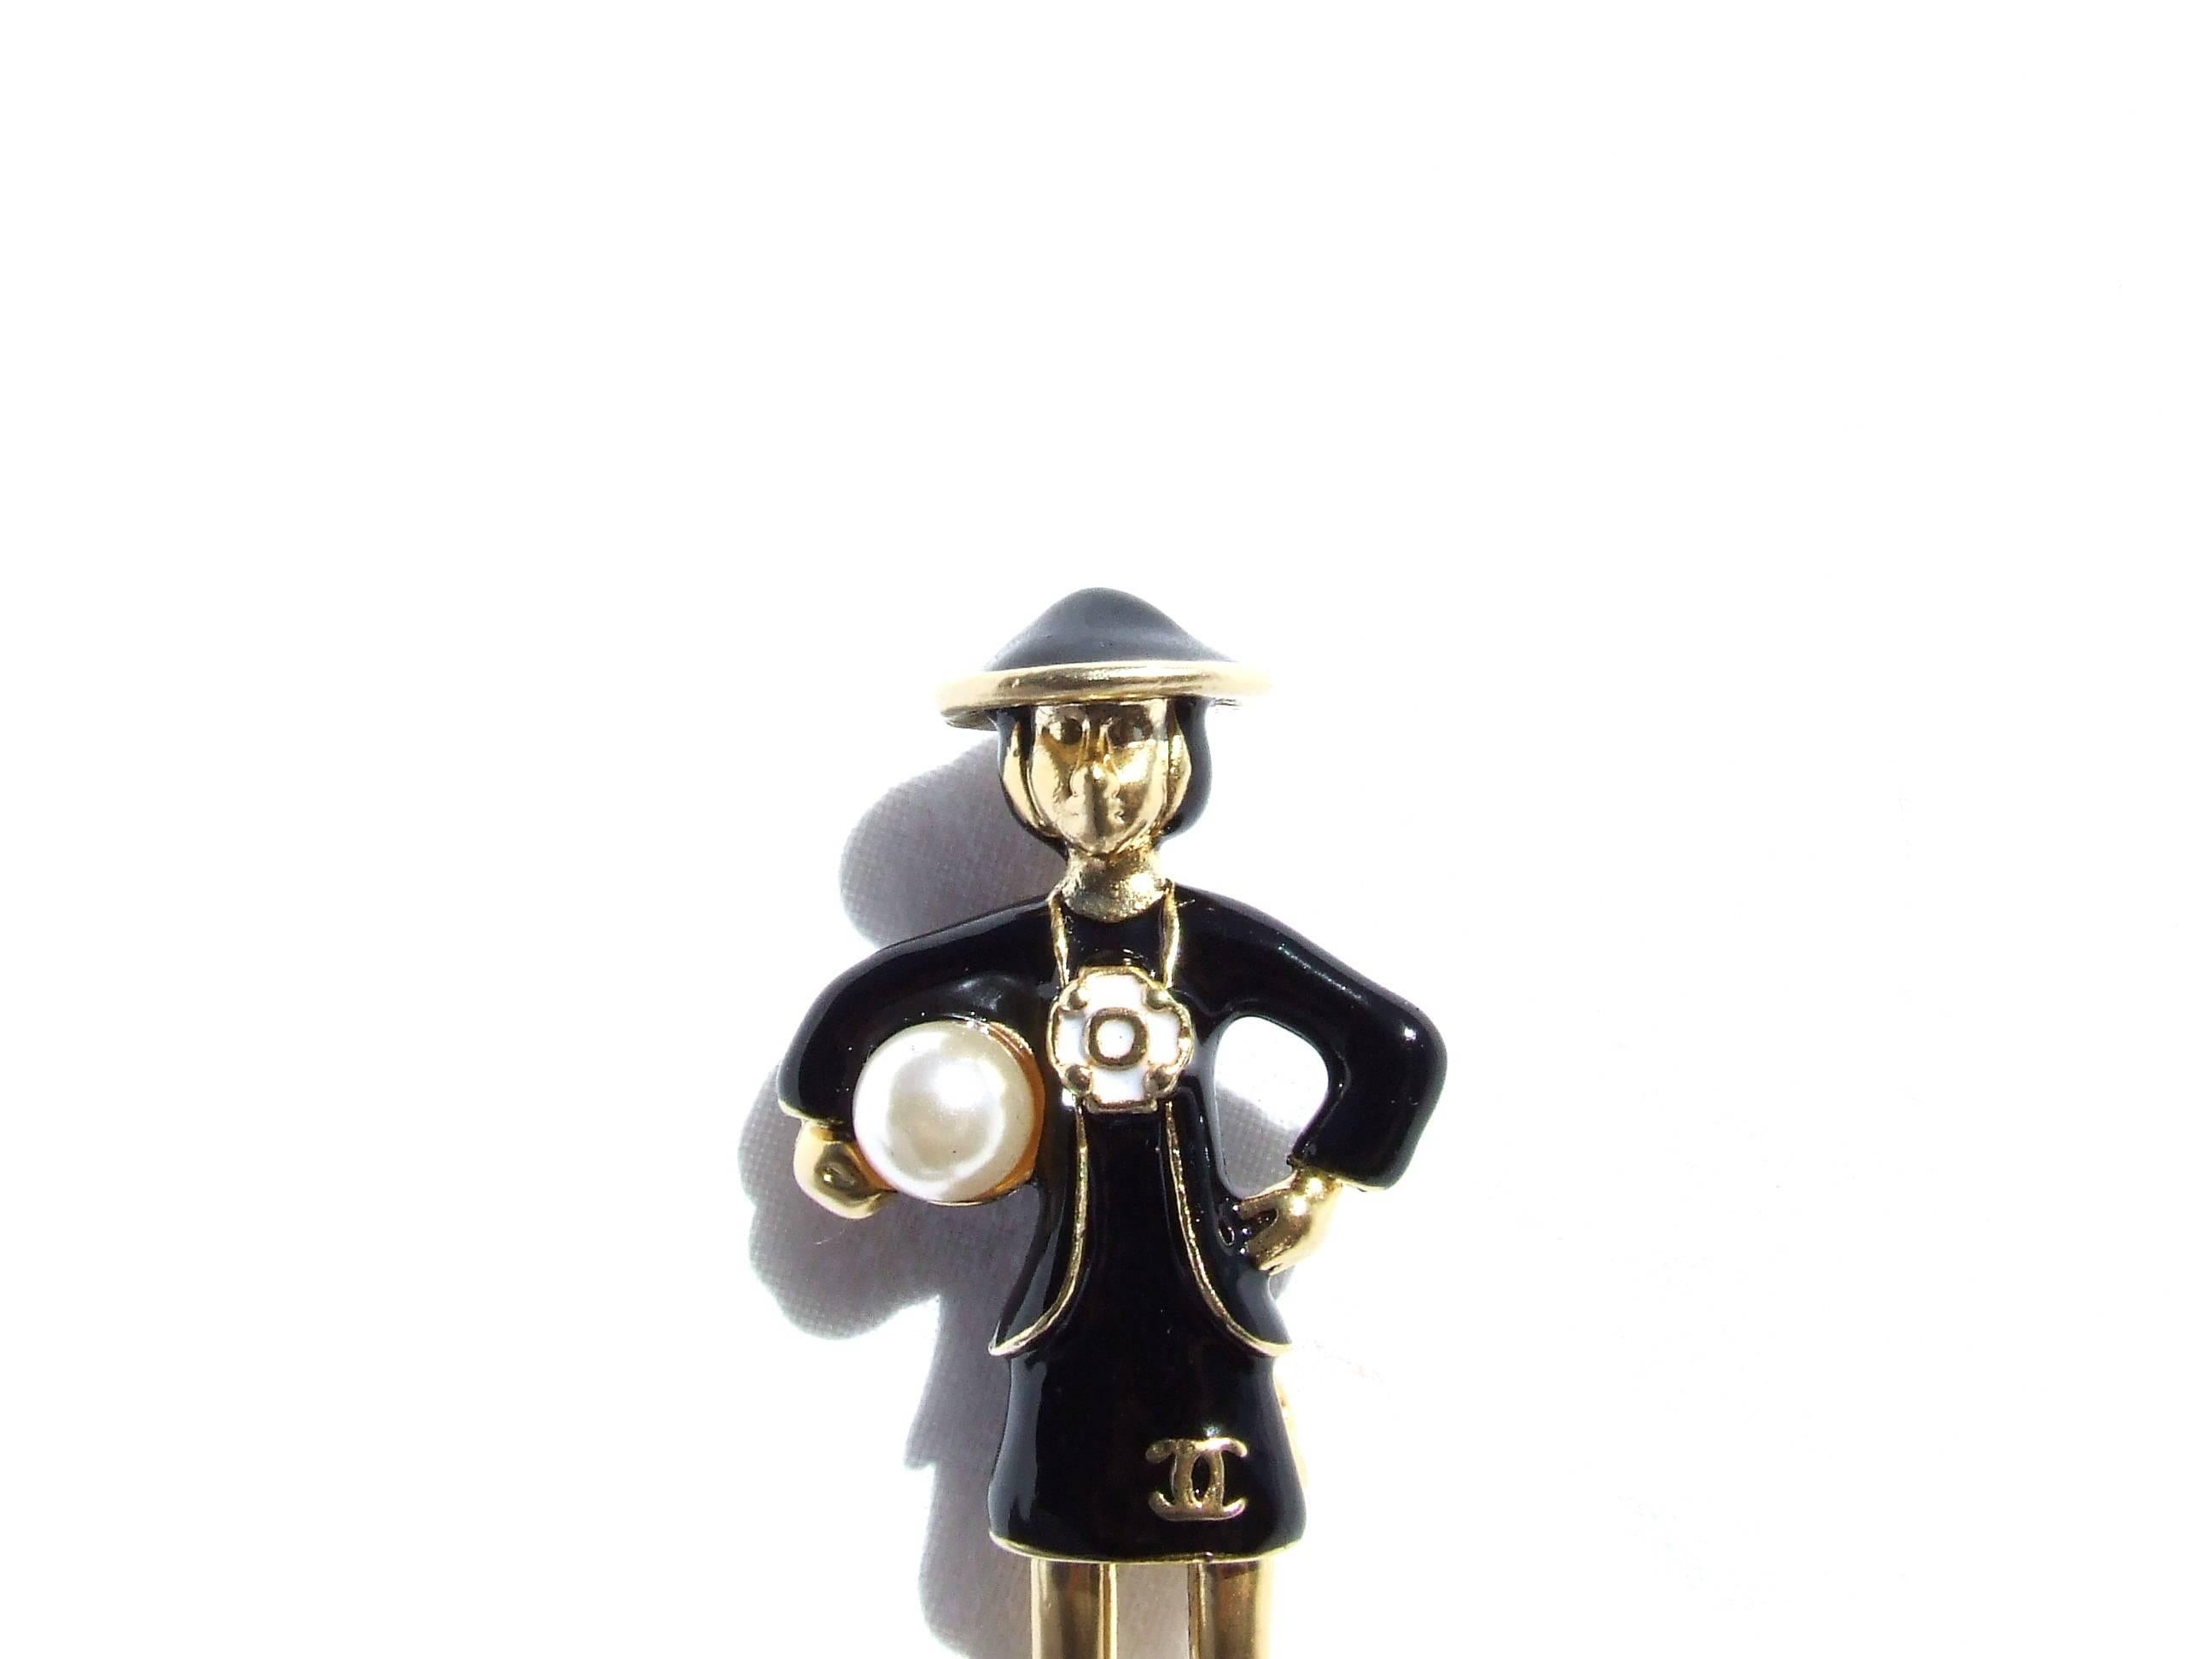 Beautiful Authentic CHANEL Brooch

Made of golden Metal, dress and hat in black Enamel

Represents Mademoiselle Coco Chanel in her black dress, holding a false pearl under her right arm

Camelia in the middle, and cc logo at the bottom of the